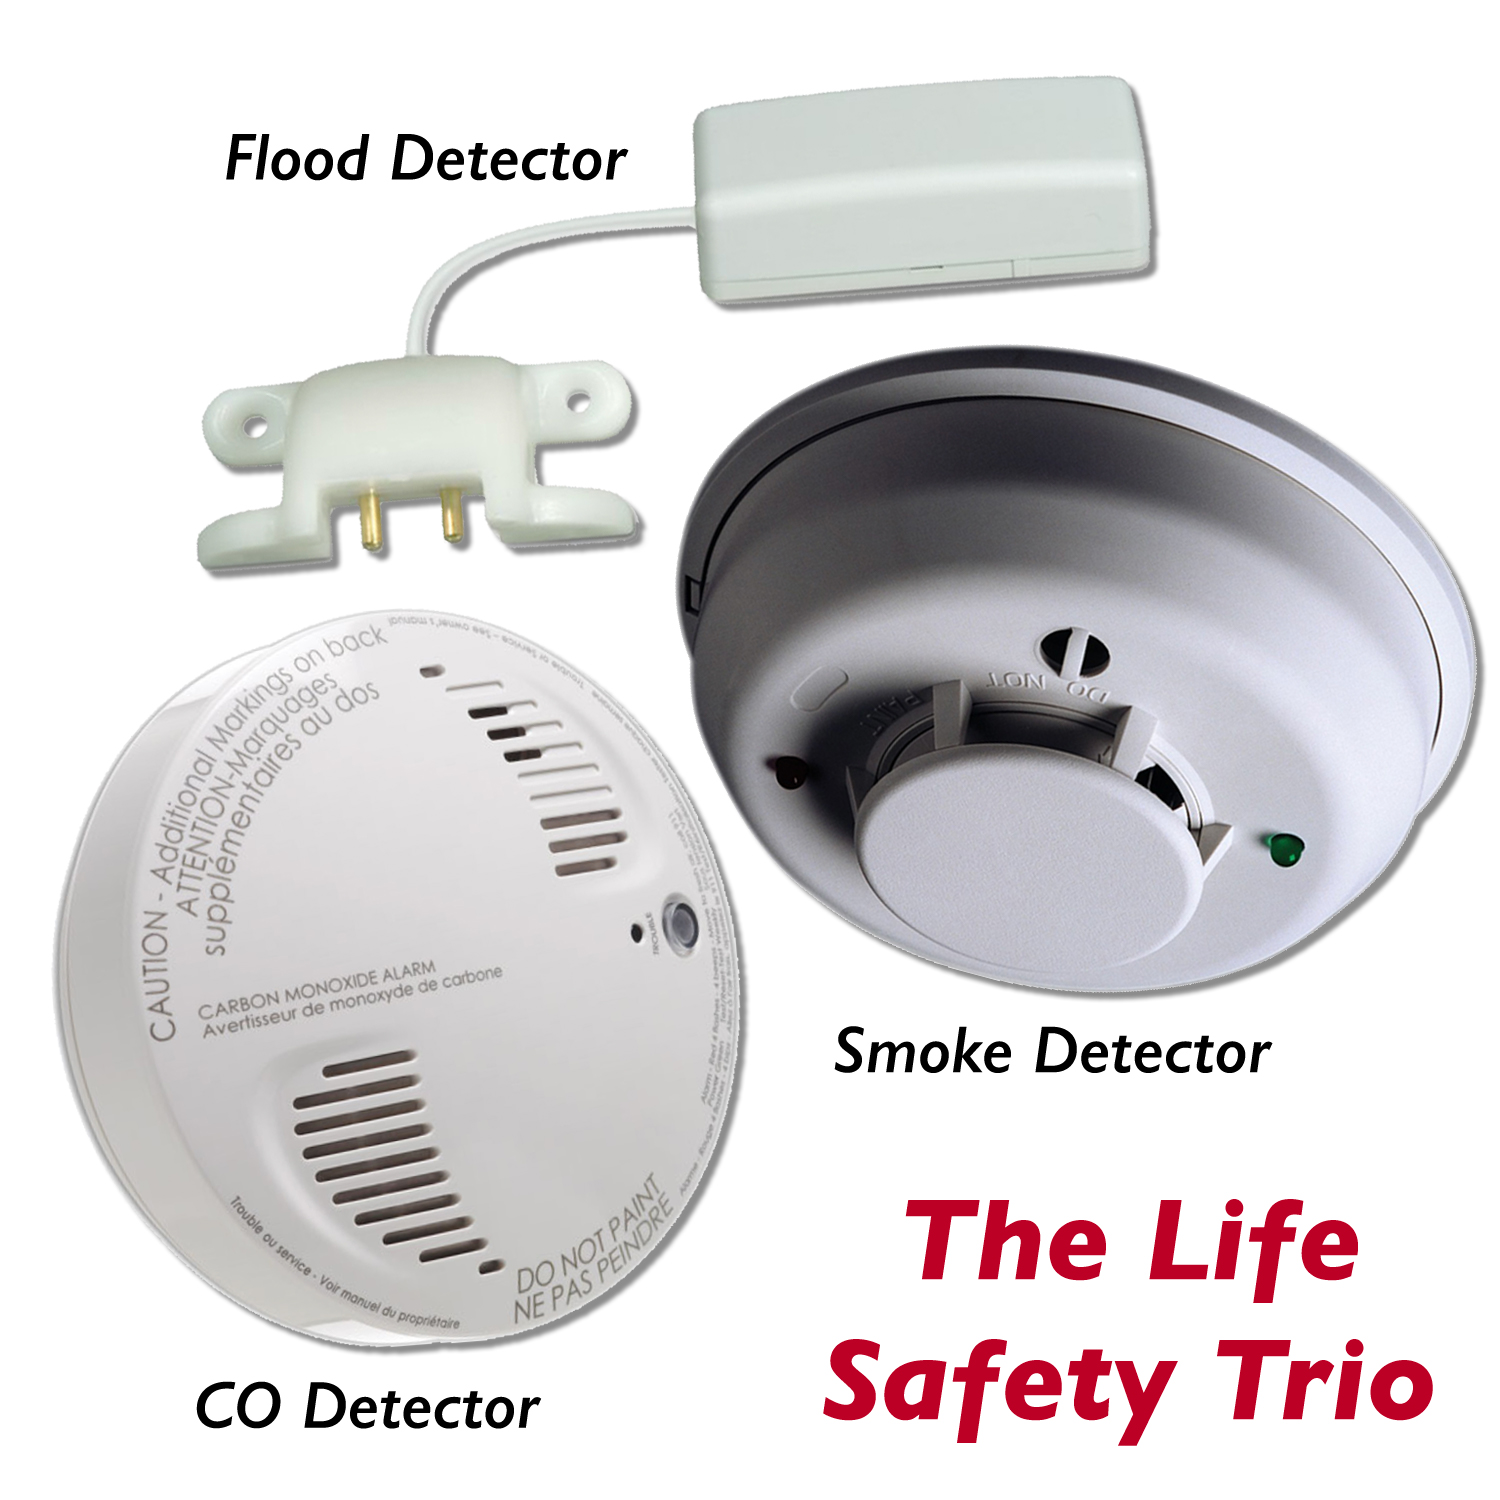 Do Heat Detectors Have an Operational Life?